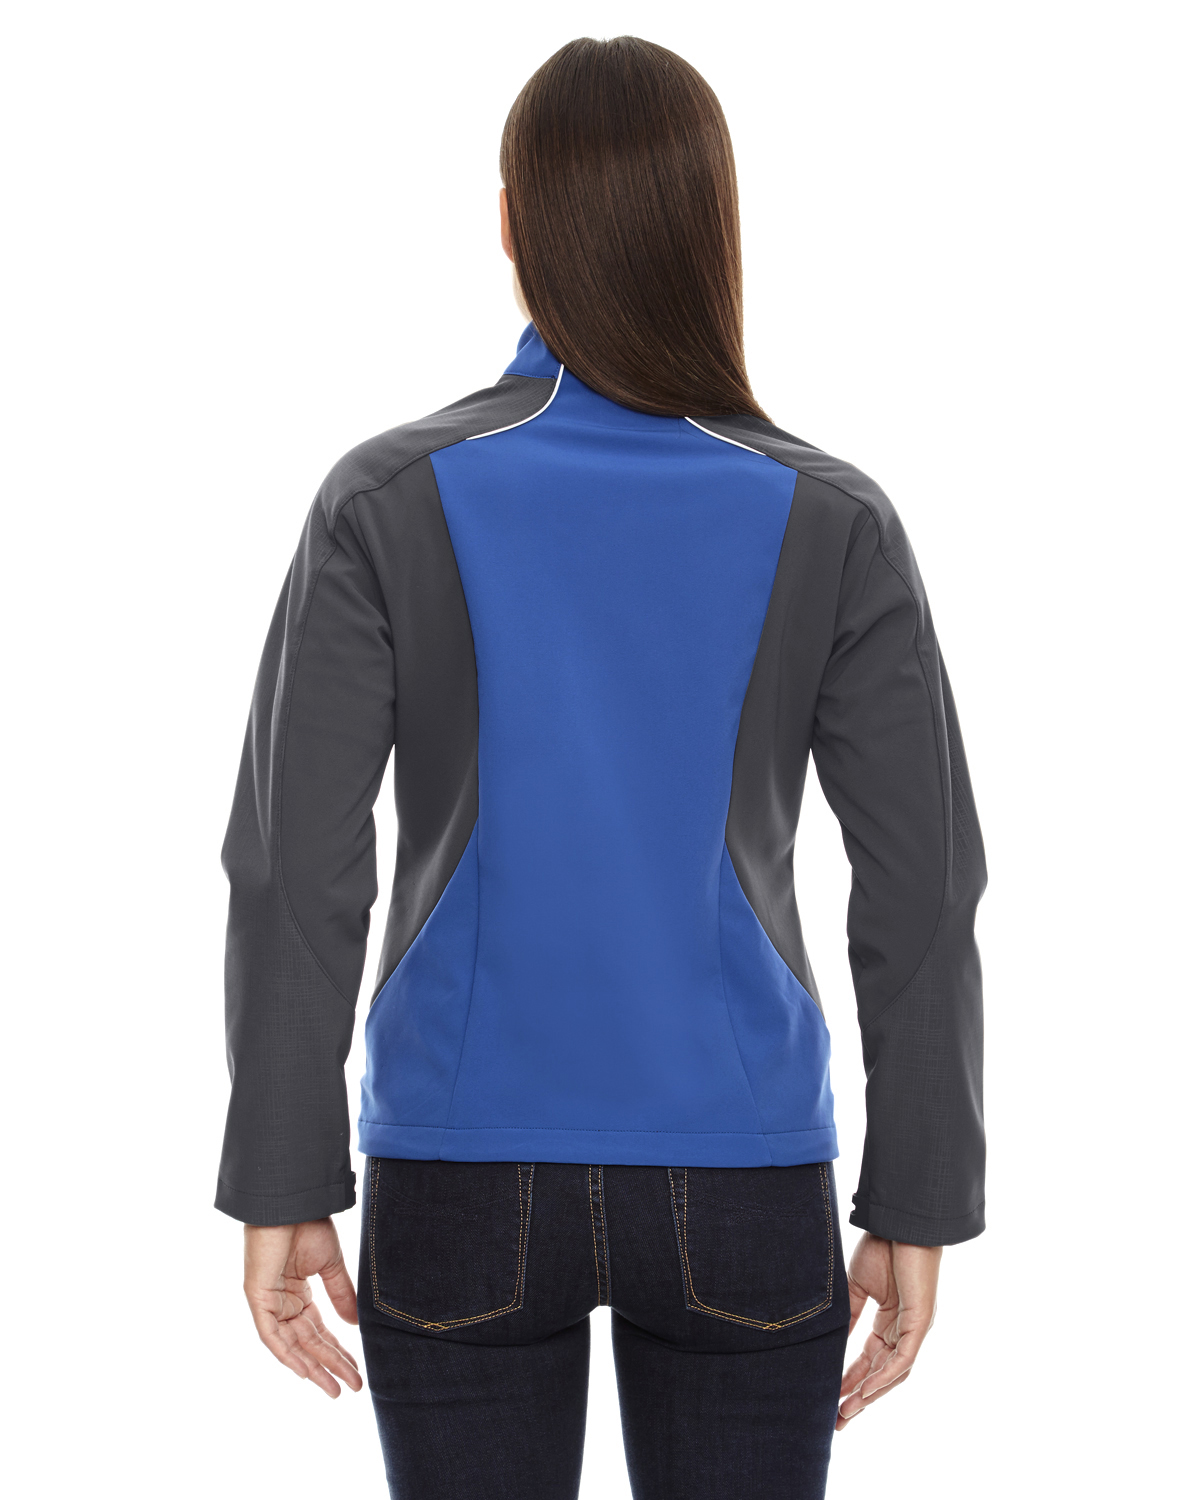 The Ash City - North End Ladies' Terrain Colorblock Soft Shell with Embossed Print - NAUTICL BLUE 413 - L - image 2 of 2